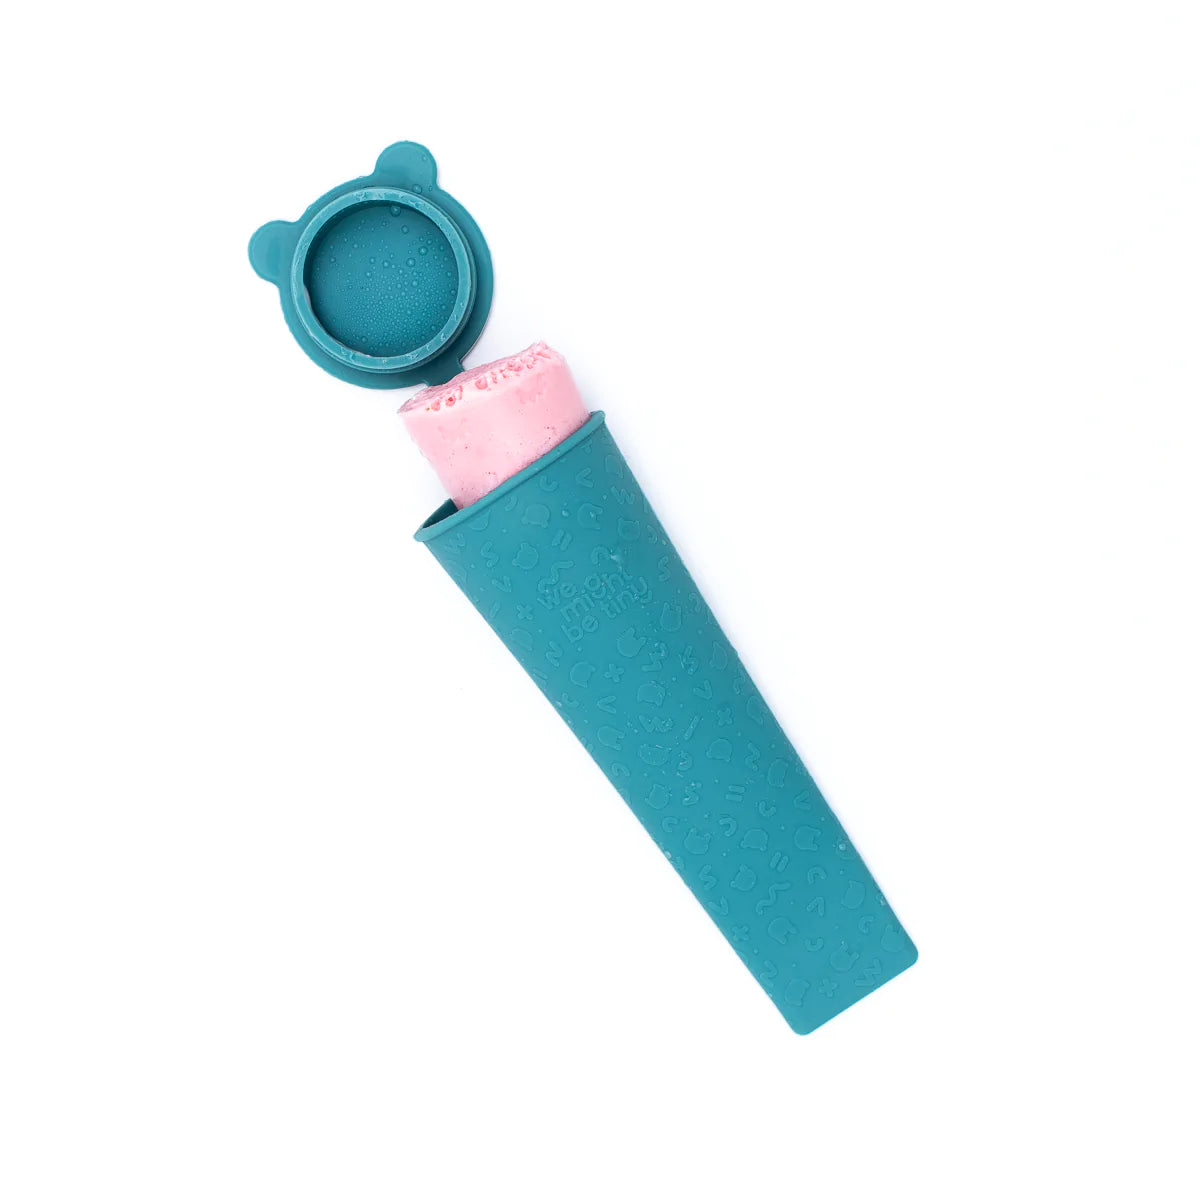 We Might Be Tiny Tubies - Push Pop Icy Tubes Pastel Pop